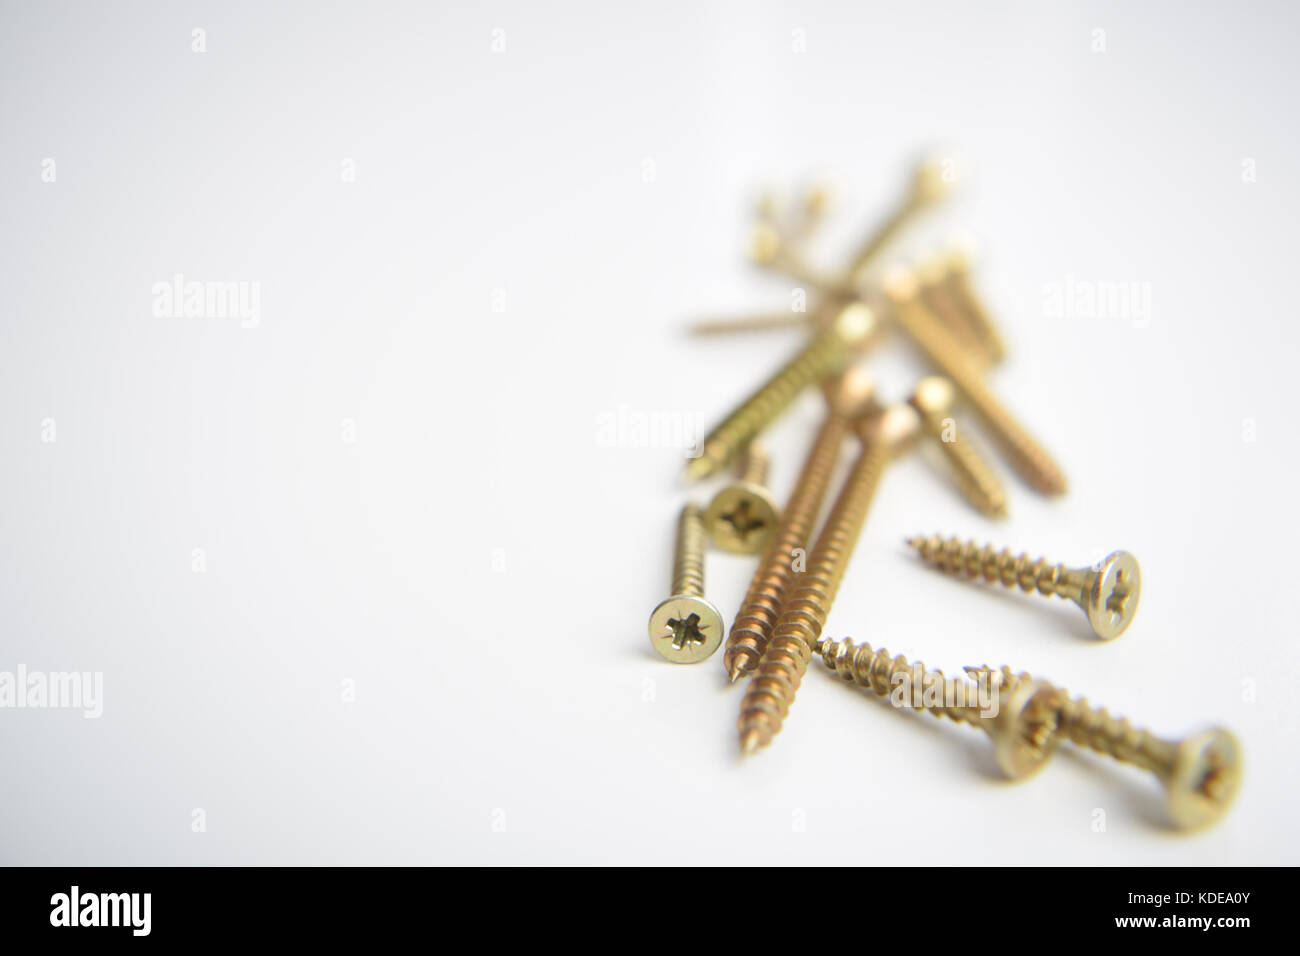 Pile of brass screws placed on a white background with shallow depth of field Stock Photo